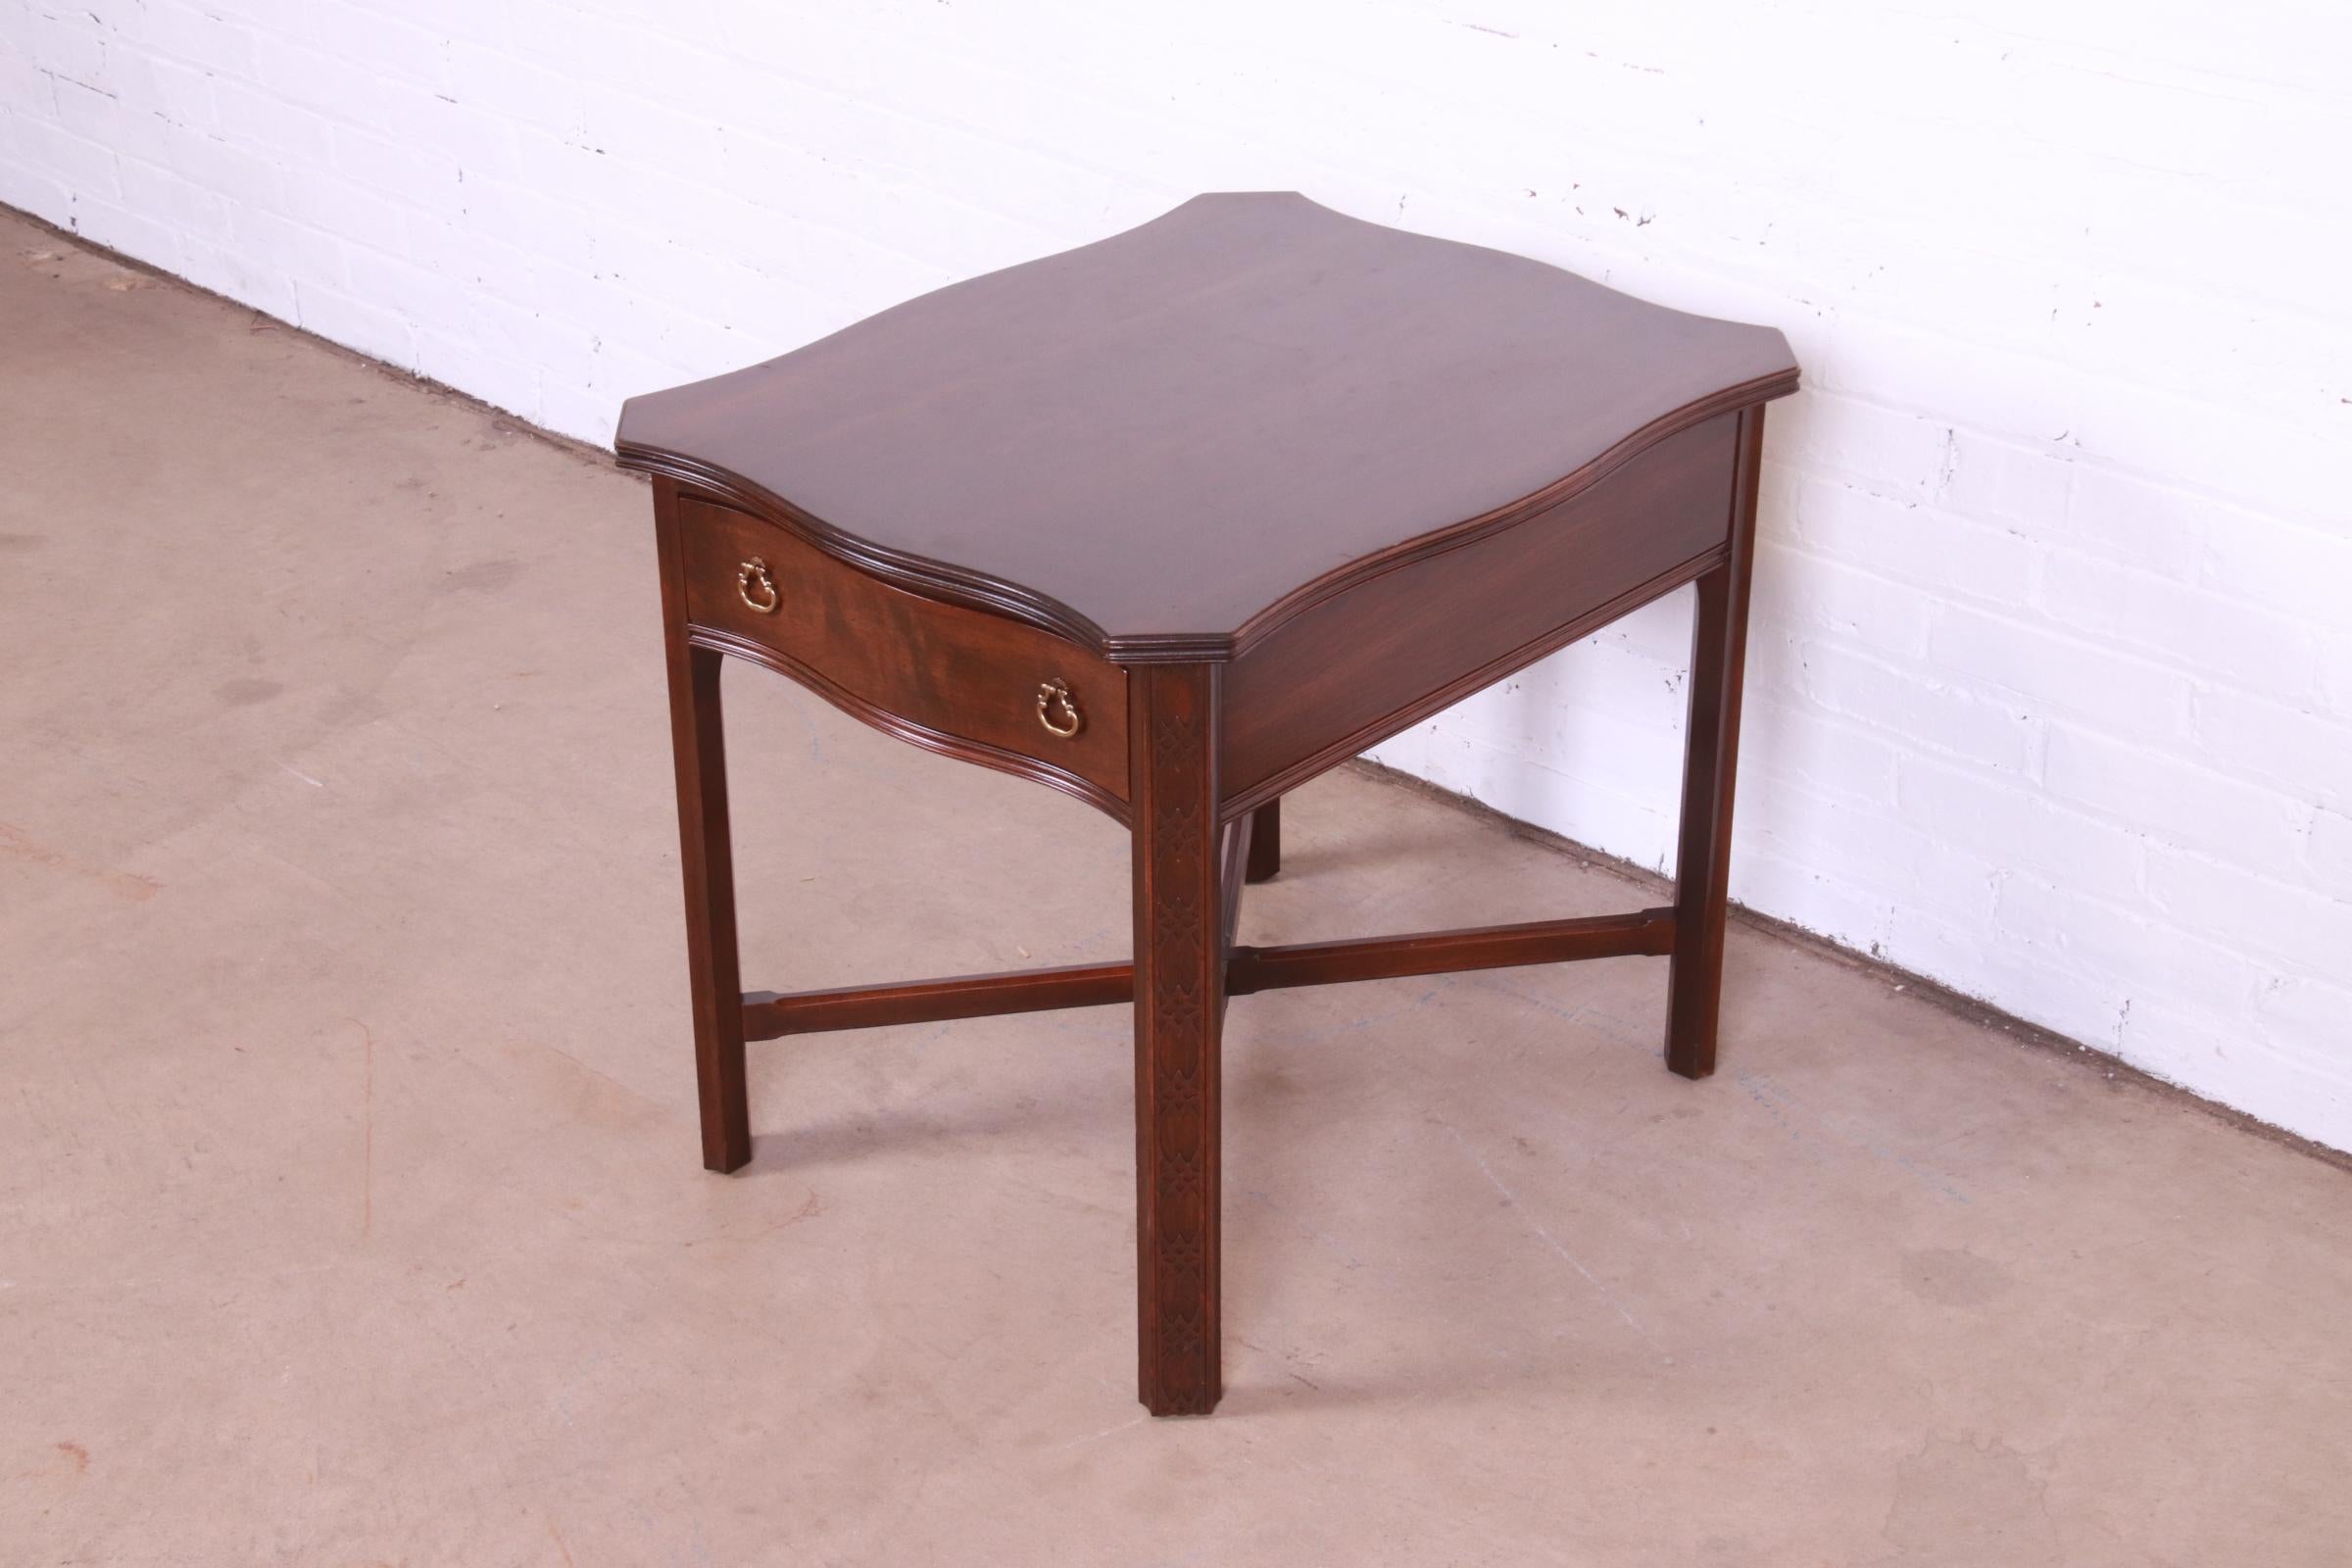 American Ethan Allen Georgian Carved Cherry Wood Tea Table or Occasional Side Table